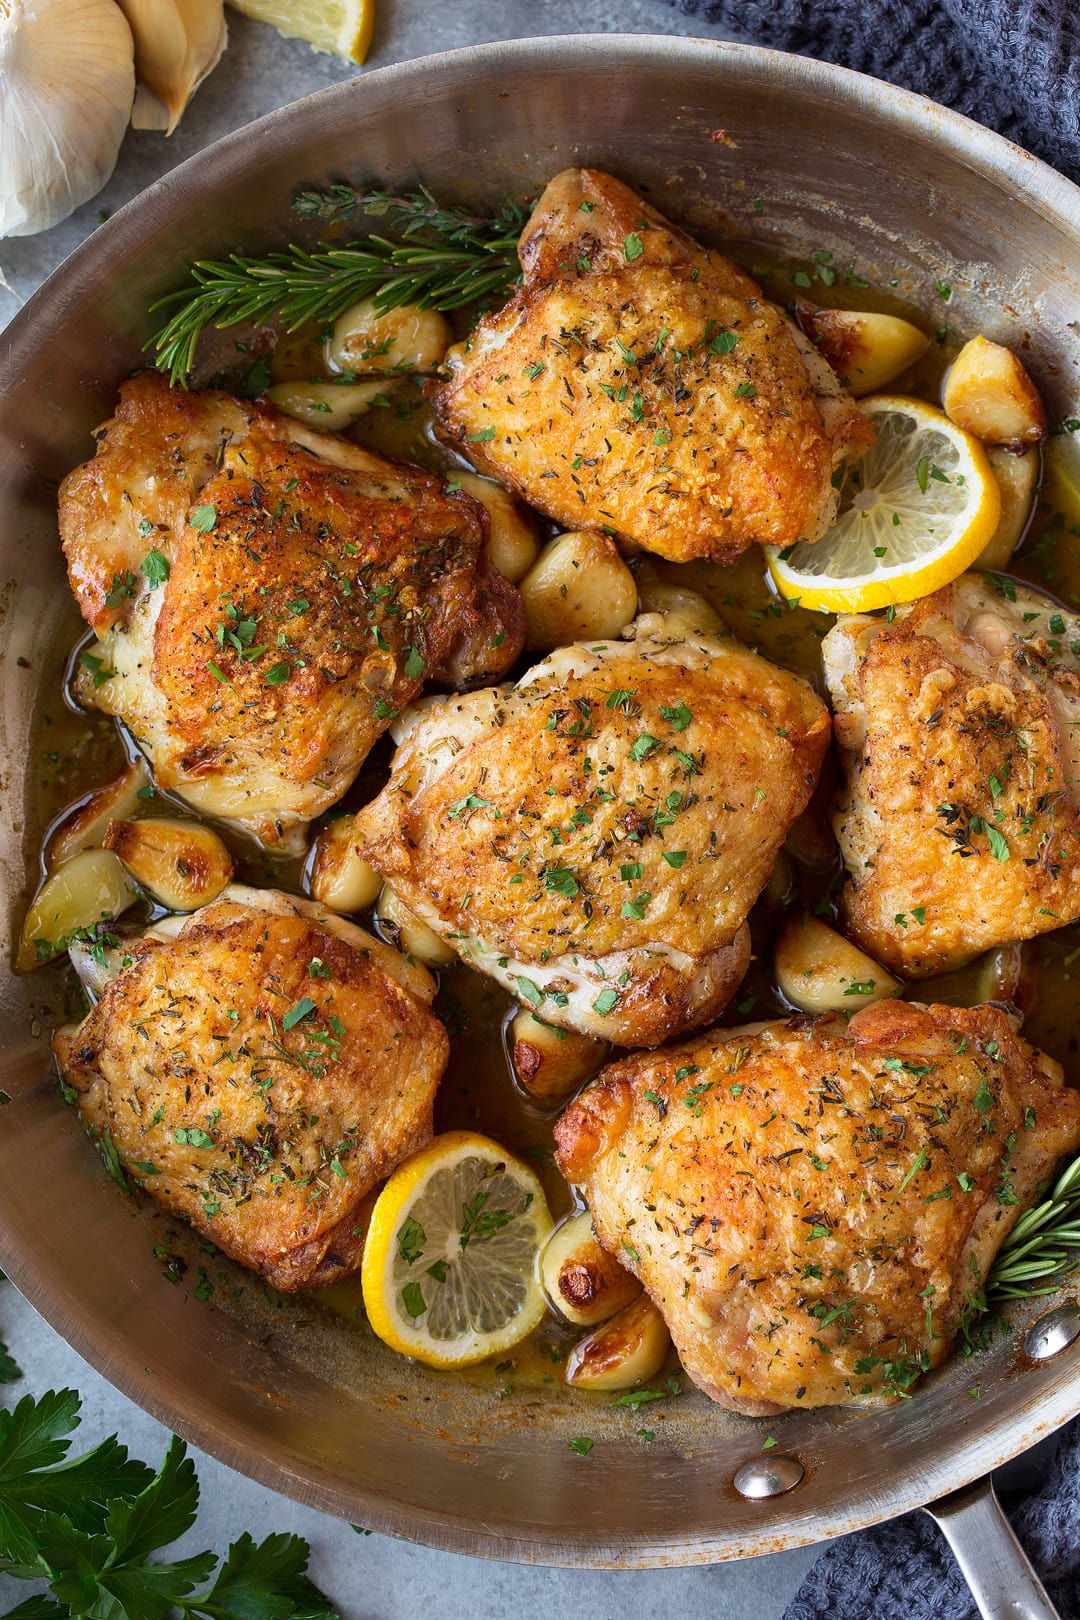 Roast chicken with garlic, lemons and herbs in a large stainless steel skillet after roasting.